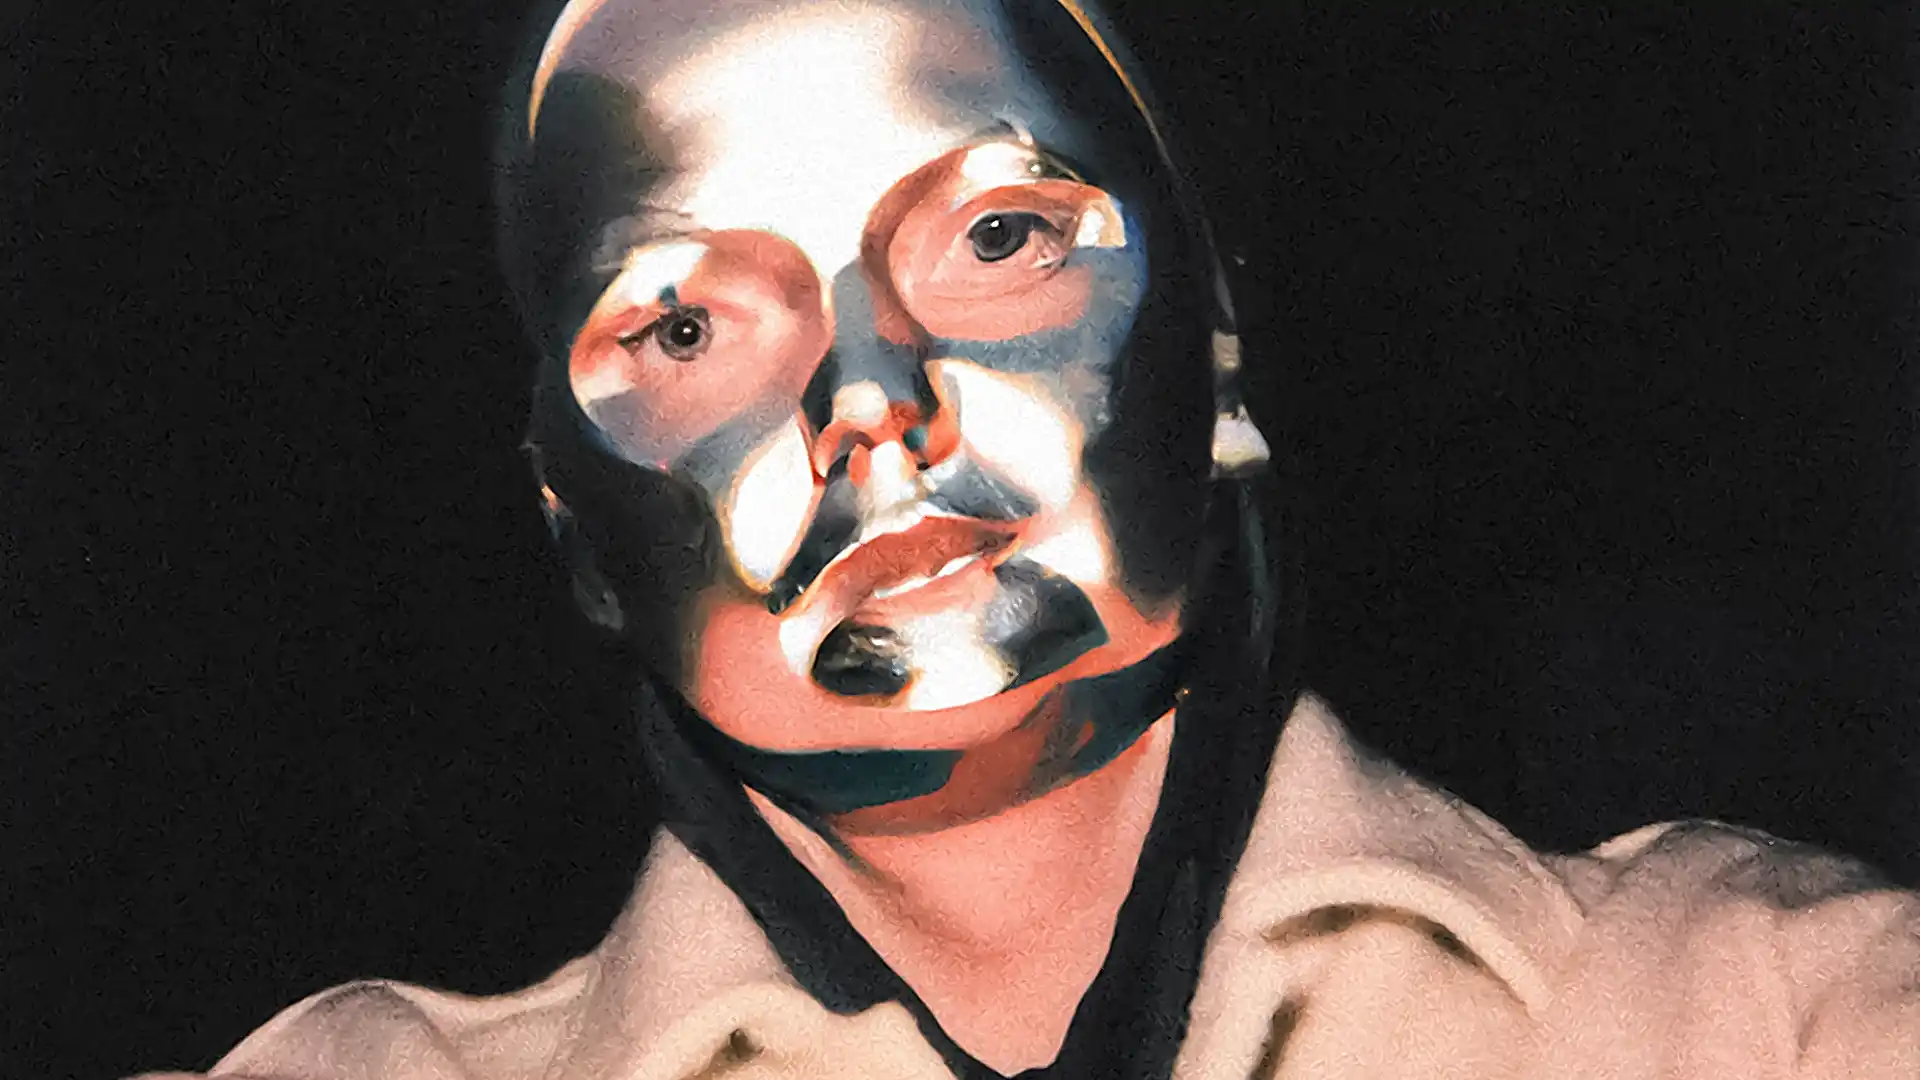 Piers Thibault photo wearing a metal mask